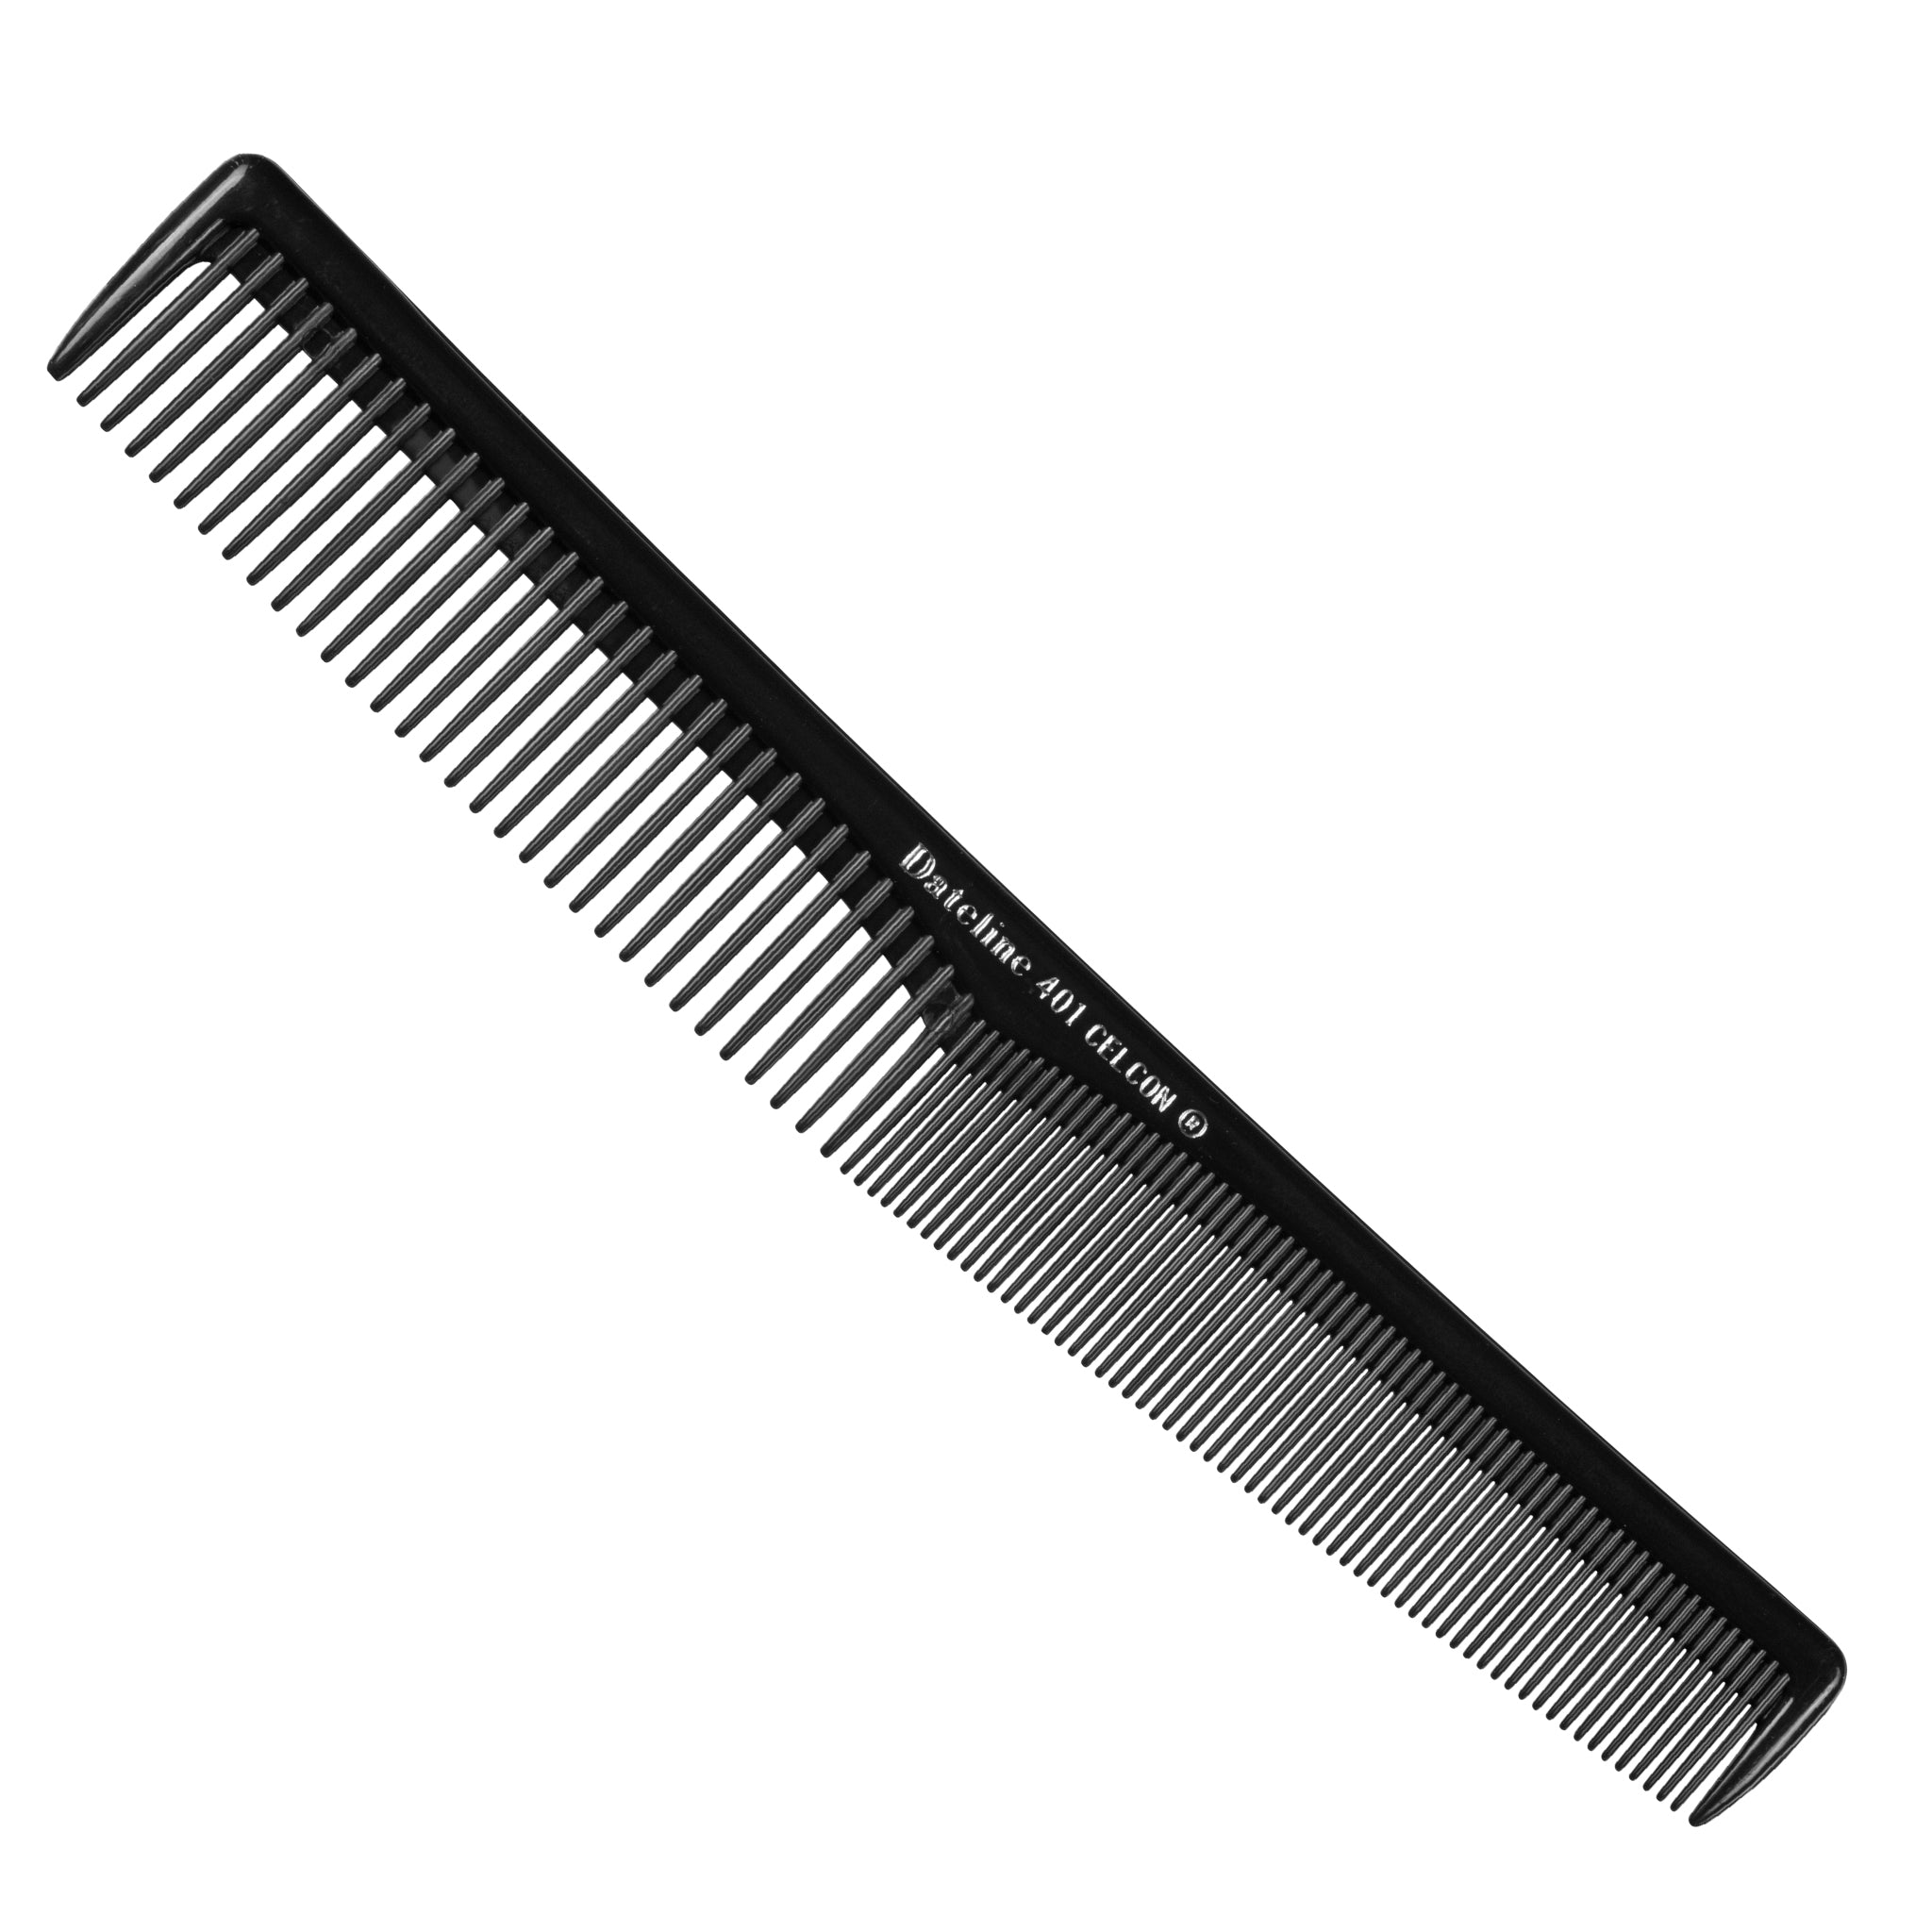 Black Celcon Styling Comb 401